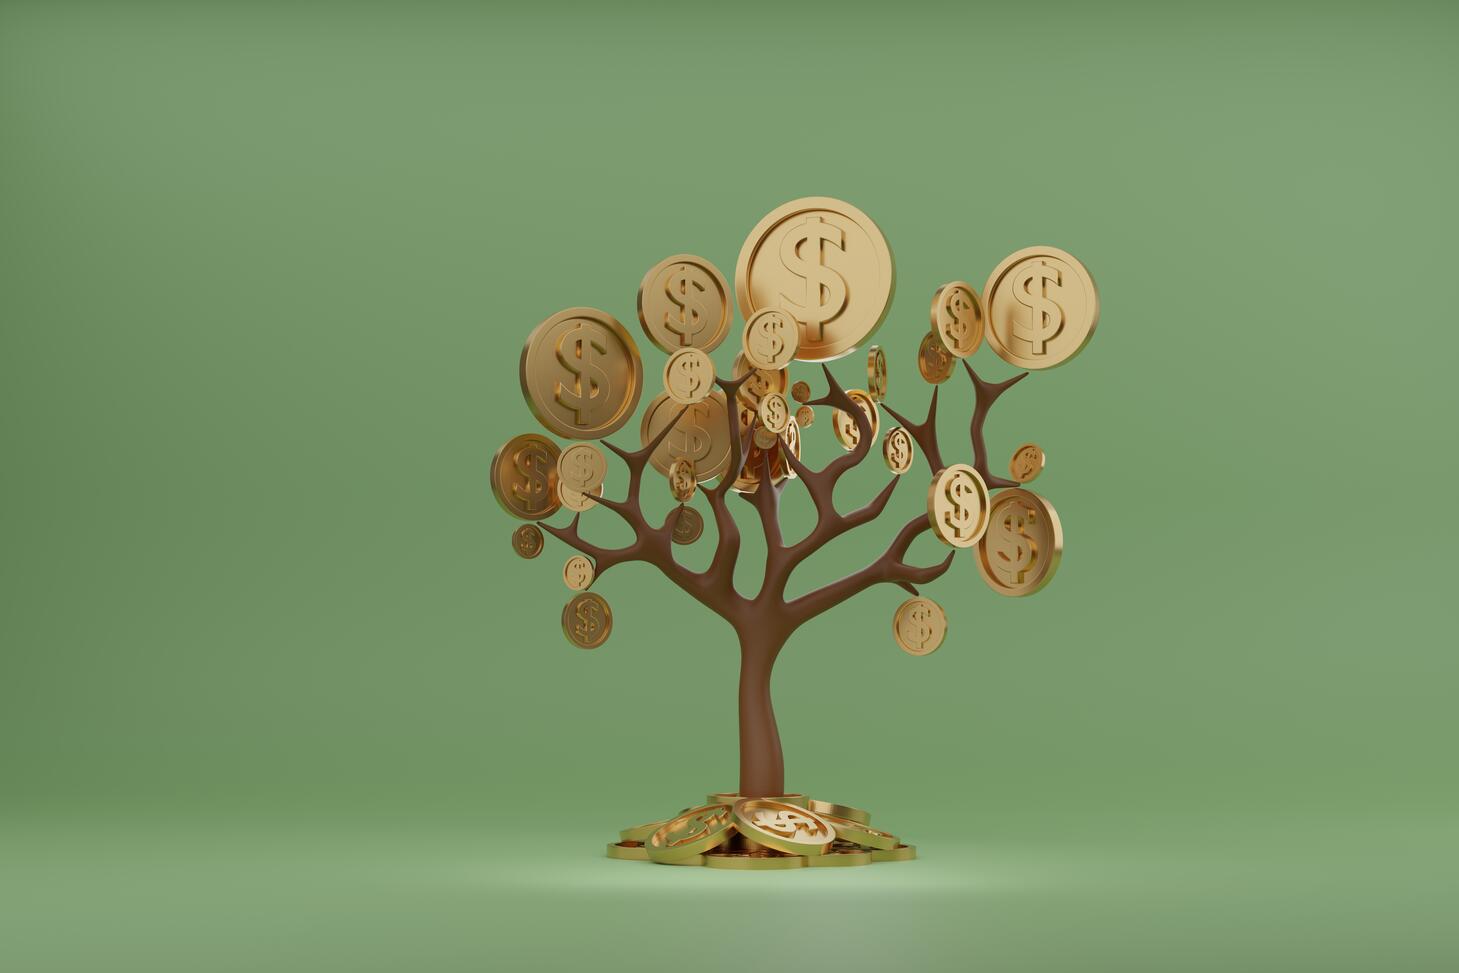 A figurine of a tree with coins growing from its branches